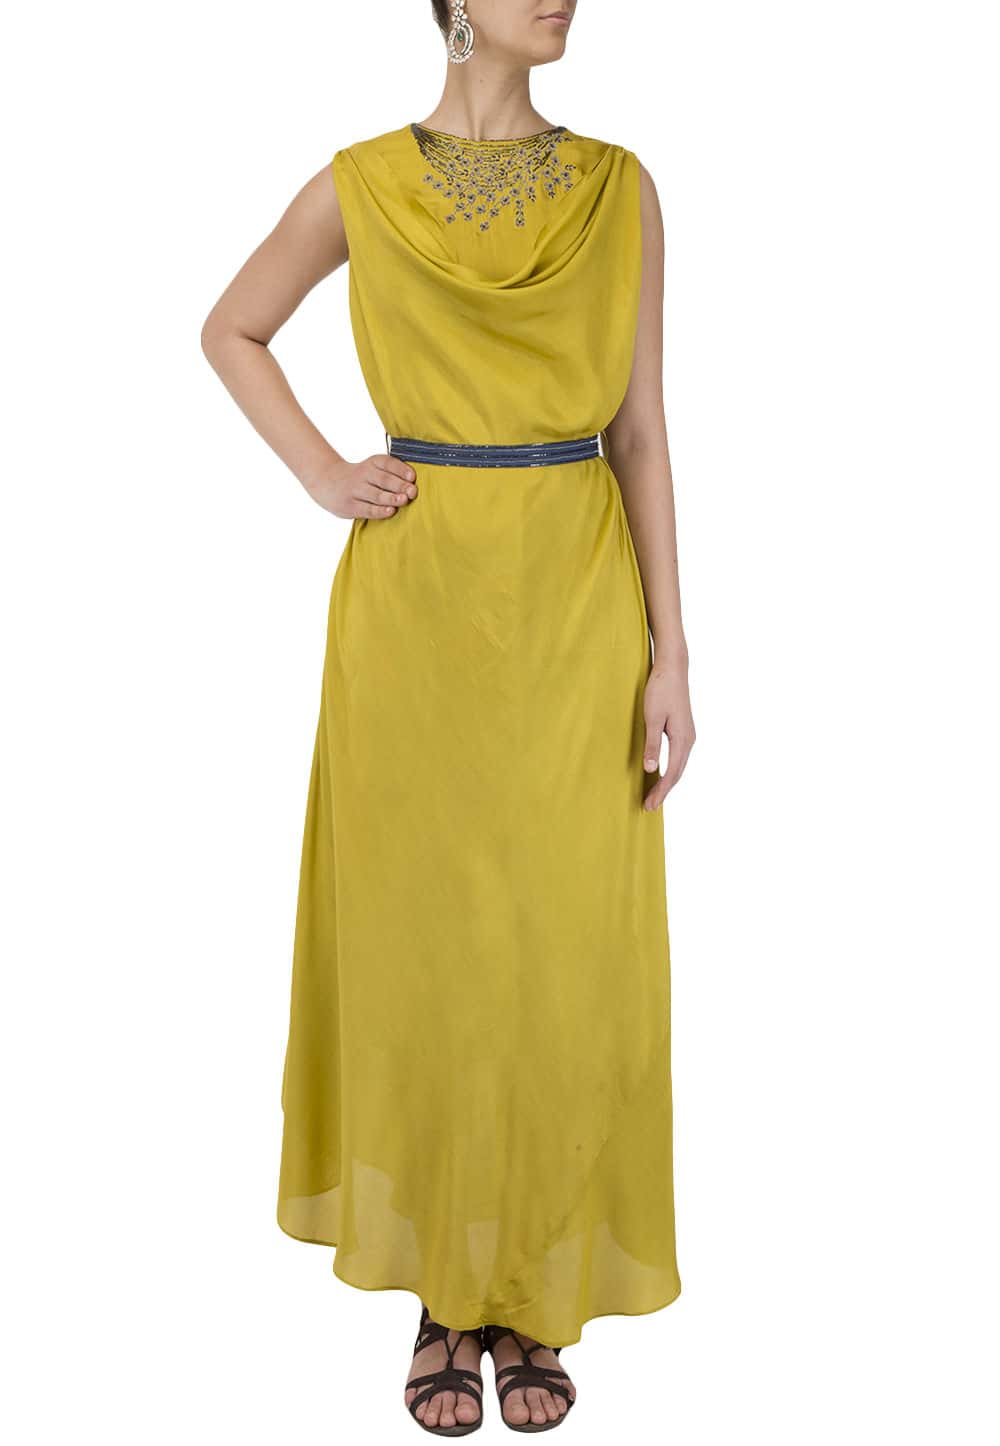 Khaki green cowl neck dress available only at IBFW